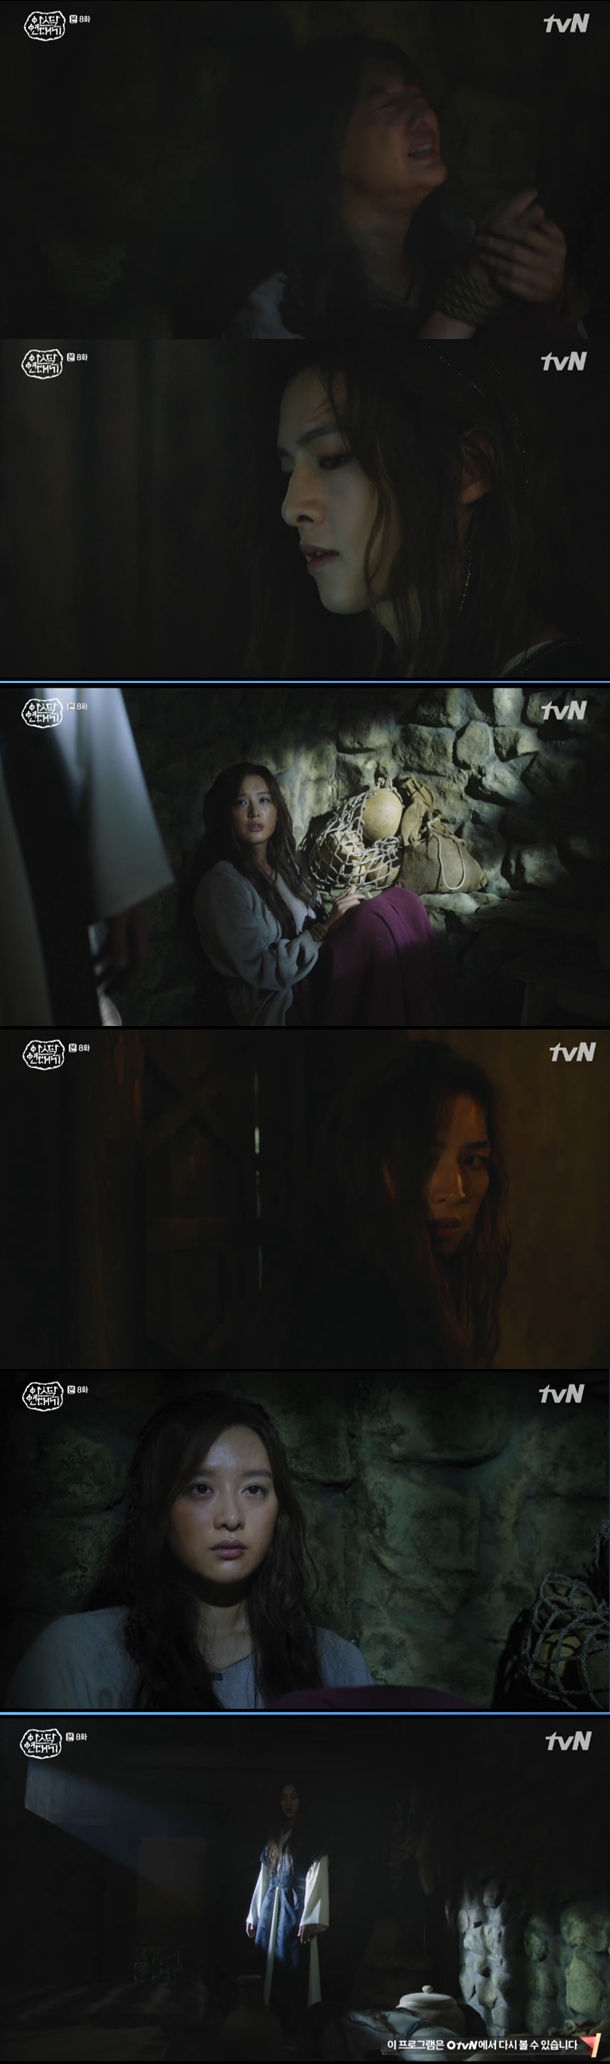 Tanya (Kim Ji-won) came to life.In the Saturday drama tvN Asdal Chronicle, which aired on the night of the 23rd, Tanya, who only grieved for knowing that the silver island (Song Joong-ki) was dead, appeared to jump into a power fight using Saya (Song Joong-ki).Saya told Taealha (Kim Ok-bin) that she saved Aaron (Lee Do-kyung) and killed a short wall (Park Byung-eun).Taealha asked, Its really you, but Saya only made a sneering look.Saya, who revealed what he had done, said, Now I have revenge on Tae-al-ha. Now I have no feelings for Tae-al-ha. He added, From now on, I will need it.Taealha instructed Saya to call me mother once, and Saya laughed, How old is age? But he followed Taealhas words.Saya said, It is now my mothers turn. Tae-alha encouraged her to revenge her father, Hami Hall (Cho Sung-ha), who had made her a child since childhood.After the conversation with Saya, Taalha found Hamihall, who she declared to him that he was the fish of the Sea.Its not just for me that raised you as a child, Hamihol explained, but Taealha brought out the terrible things she had experienced with Sanung.When she heard her, Hamihol said, So did you stick to the side of Tagon? Tagon will break the federation and become a king.The federation is broken anyway, he said. Tagon and I will stand at the top.She said, I told her to marry Aa, she said, I will choose now.Tagon (Jang Dong-gun) was poisoned by the wall and became a new head of the federation while wandering around the police. As he was in the ceremony to climb to the president, Tagon married Aamot, a woman of Aa, Aa.During the ceremony, the Great Khan dragged a person dressed as a silver island and drowned him in boiling water in front of people.The League people, who thought he killed Sanwoong (Kim Ui-sung), cheered when they saw Tagon.After becoming the head of the Federation, Tagon quickly settled the League, calling on the Araha of each tribe to gather a room where the tribes gathered in Asdal and asked them to fill it.Tagon, who saw this appearance, looked at Tagon, who hid his ambition, saying, It resembles Sanwoong. Tagon appointed Aaron as a left-handed person, and in fact put the White Mountains under the president.Tagon found his room to see Saya in 20 years. As soon as he saw Saya, he said, You are now an adult.Saya apologized, saying, It was my mistake at that time, referring to the moment when Tagon was angry.Tagon told Saya to undress, then confirmed that Igts skin had been peeled off and allowed him to go around now.Saya asked Tagon, who was about to return, Why did not you push more when you became aarramun? The king should not be a good person.He then revealed his ambition, saying, My father should become a king and let people know the superiority of Igt.But Tagon warned that if you do not know fear like you, you will die first. Saya said, My father is Igt, but eventually he could not finish.Taalha called in Tanya (Kim Ji-won) separately and ordered him to monitor Saya.Is it now adapted? asked Taalha, who nonchalantly replied, I can do anything to live.Taalha instructed Tanya not to tell anyone about Saya and to monitor it, then warned that you have to follow my words to save your father.Saya had been acting martial arts on Hattuak and then came out of the house, asking Tanya, who was following her, Why dont you run away? Tanya honestly replied that she couldnt run because of her father.She saw what she had created and recalled her village, which she said was I meet dreams, and informed her that what she had created was a dream world.He then took Tanya somewhere, thinking to himself, I think I saw you. Where he took her, ten-son (Jung Seok-yong) was working, and Tanya was delighted to meet with her father.But she was shocked to hear from her ten-son that the silver island had died.On the way back, Tanya was laughing; Saya went to her to describe the situation where the silver island died when she learned that she had heard that the silver island was dead.But Tanya came at Saya, shouting, The silver island is not dead. Hattuak beat Tanya out of Saya and locked her in the room.Tanya, trapped in the room, finally awakened, saying to Tanya, who doesnt know why theyre going through this, If you get to a powerful position, then you can understand it.If you die now, you die without knowing anything, he said, who decided to go up to the position that Saya left.She told Saya, who came back to her because she was really going to die, Please forgive me, Master, and then gave him a spell.